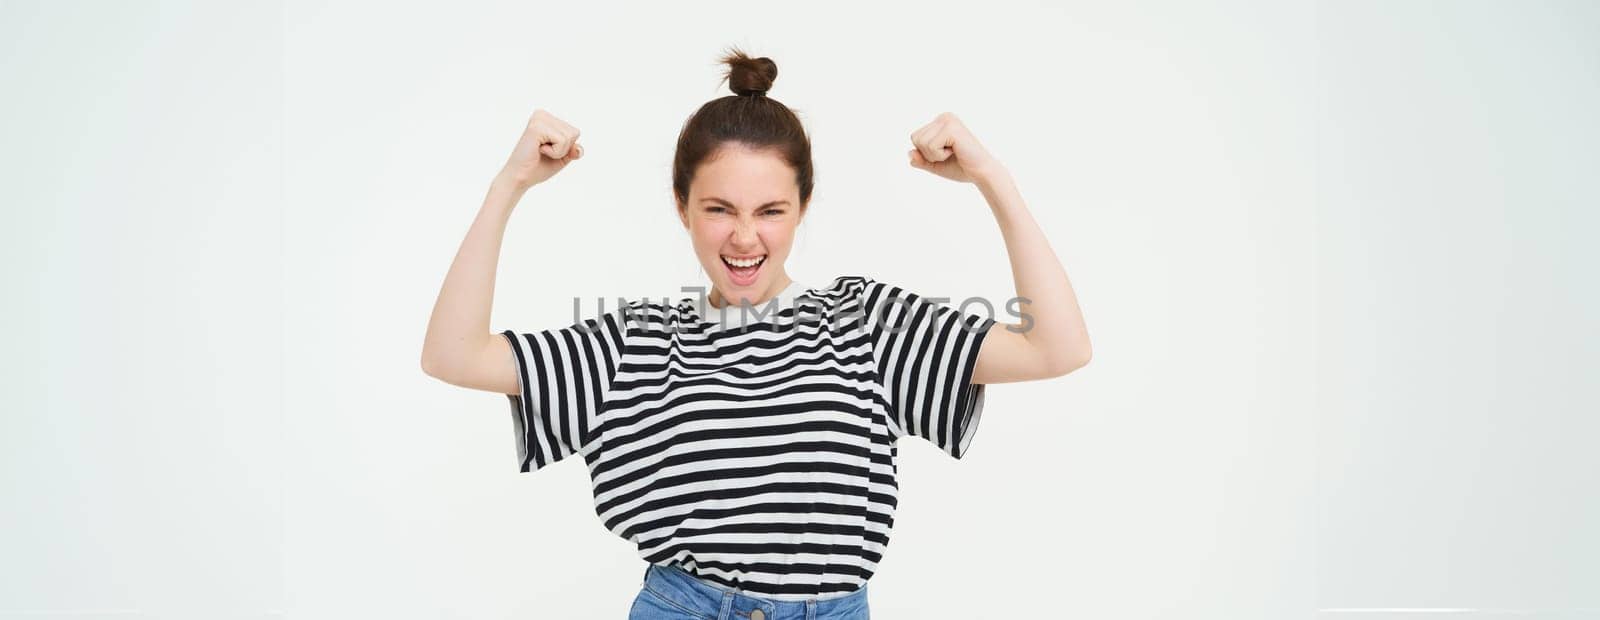 Image of sassy, strong and confident woman shows her muscles, flexing biceps, raising her arms high, standing over white background.